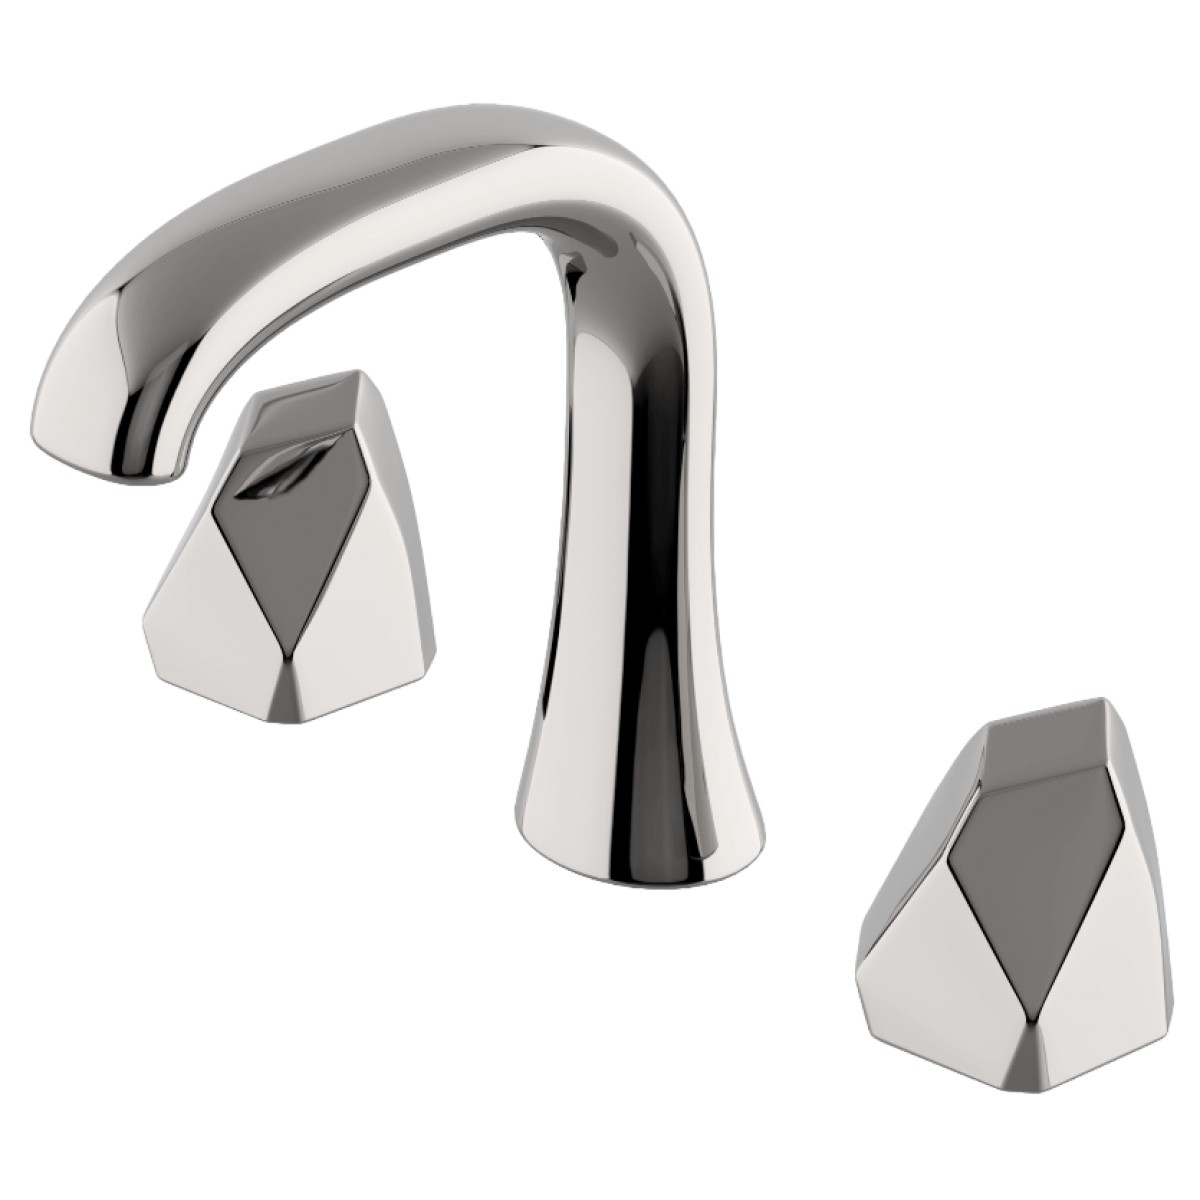 Isla High Profile Lavatory Faucet with Metal Geode Handles